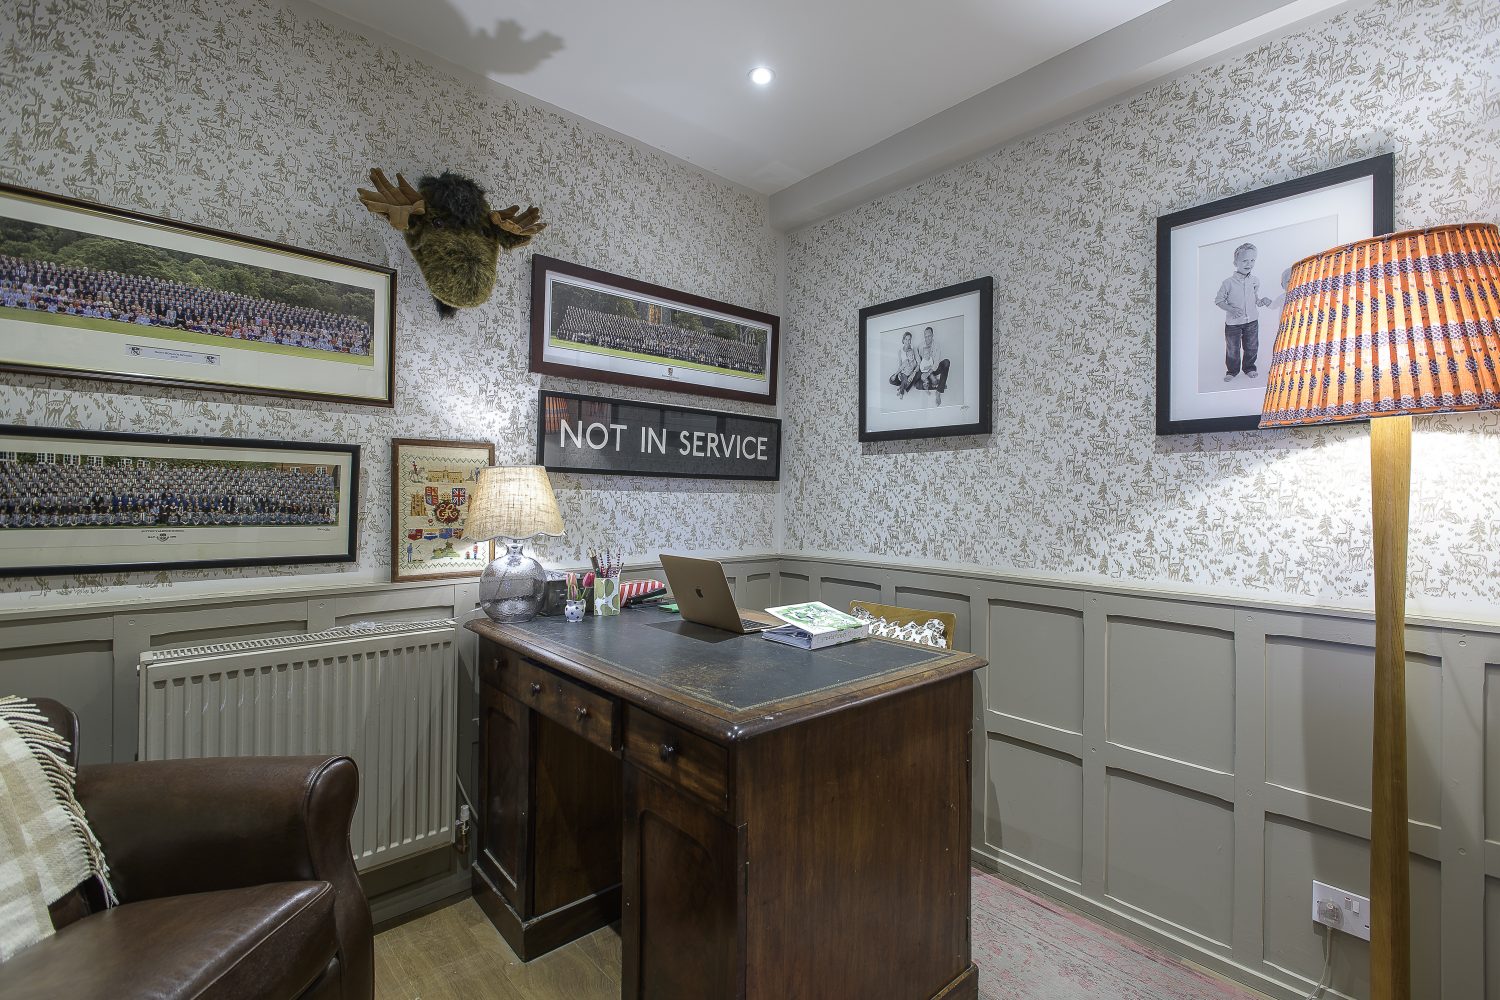 What was once the entrance to the house is now an office, with panelling painted in Farrow & Ball’s London Stone, and hand-stencilled wallpaper